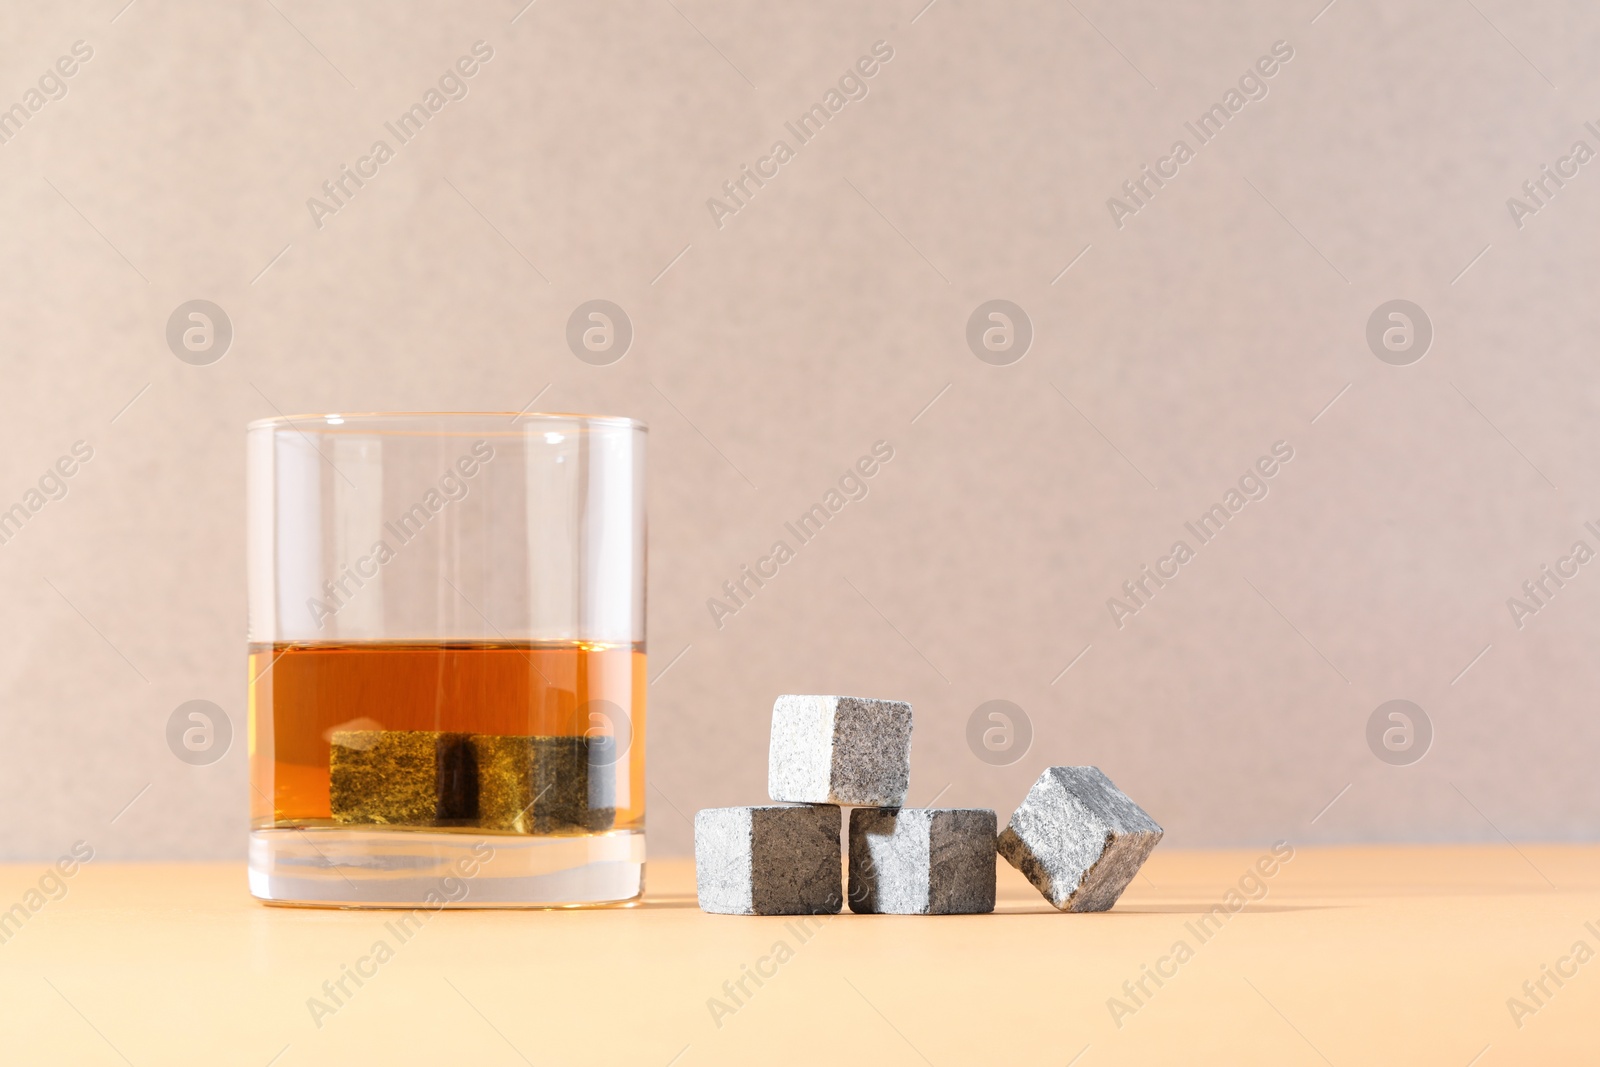 Photo of Whiskey stones and drink in glass on orange table. Space for text